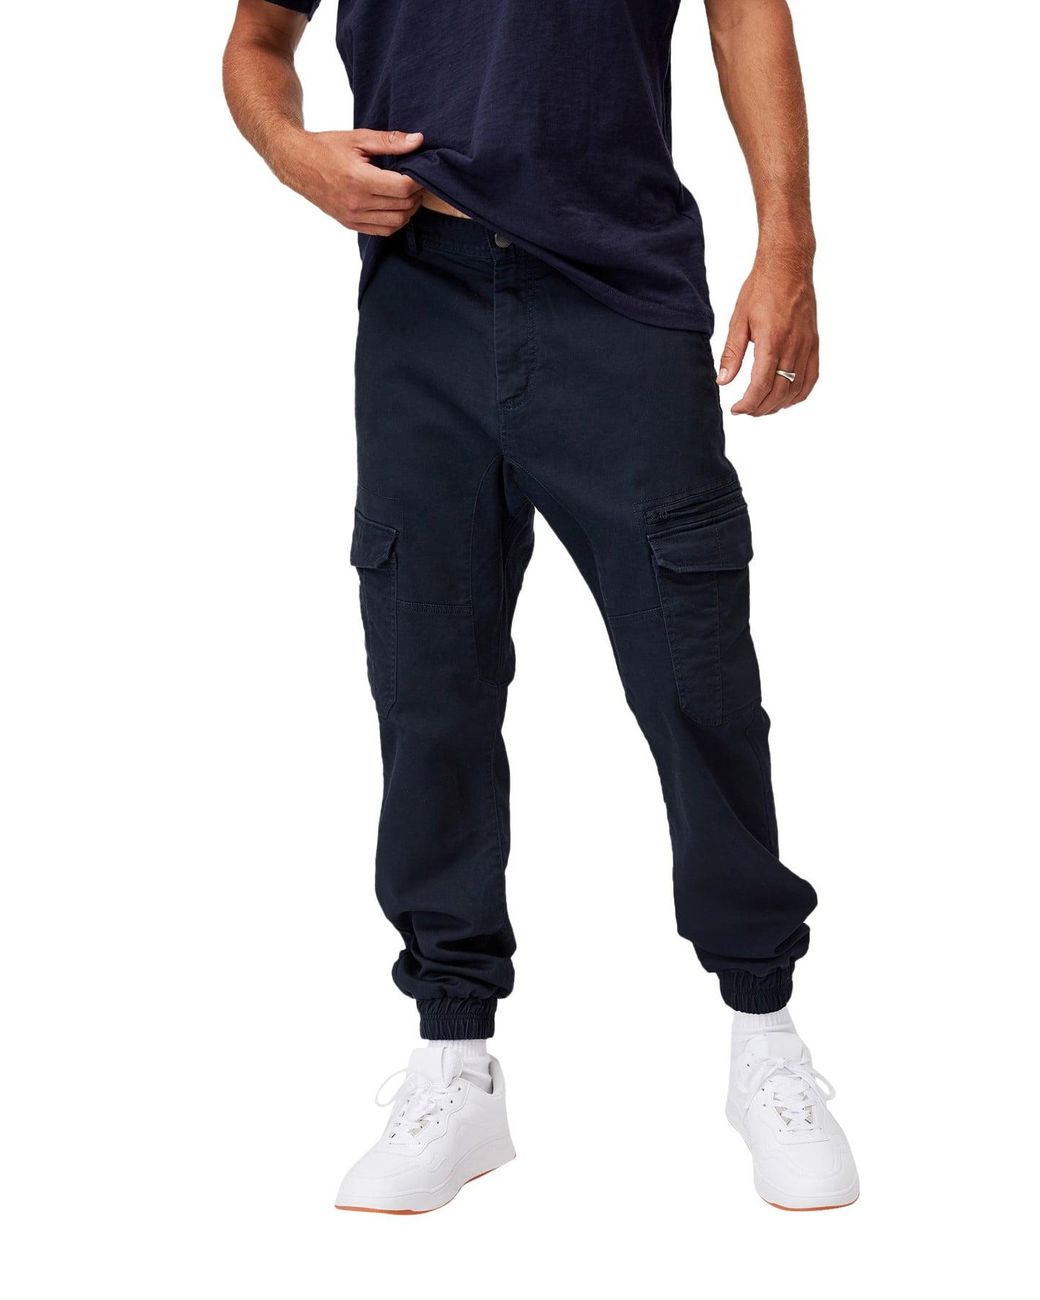 Cotton On Synthetic Knit Cargo Jogger in Washed Navy (Blue) for Men - Lyst